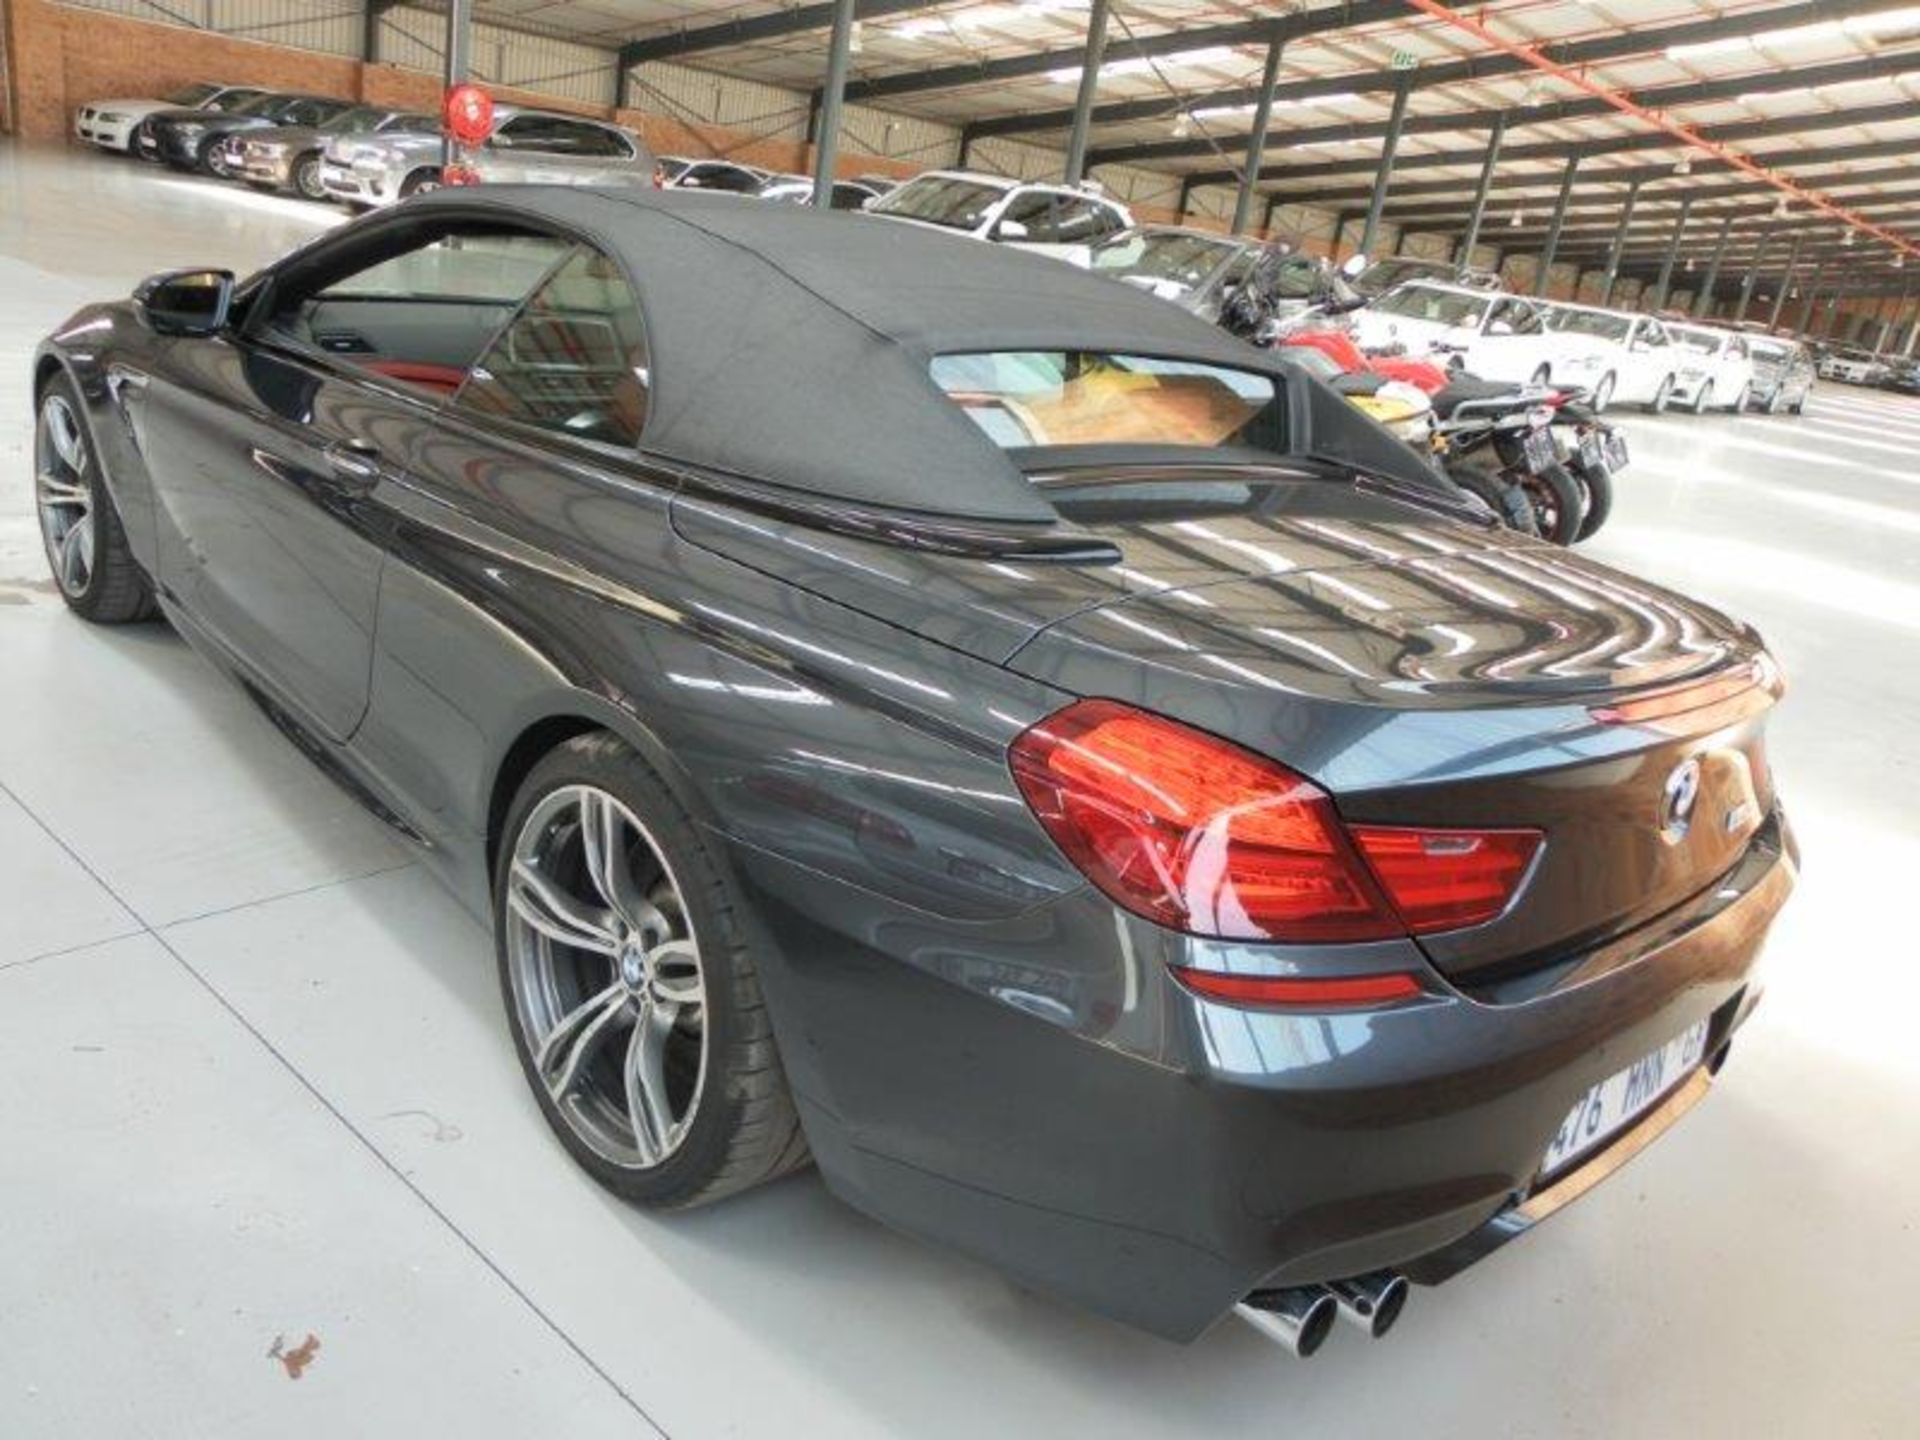 2012 476MNNGP BMW M6 Convertible Auto (Vin No: WBSLZ92030C967455 )(Maroon Leather, Rear PDC) ( - Image 3 of 4